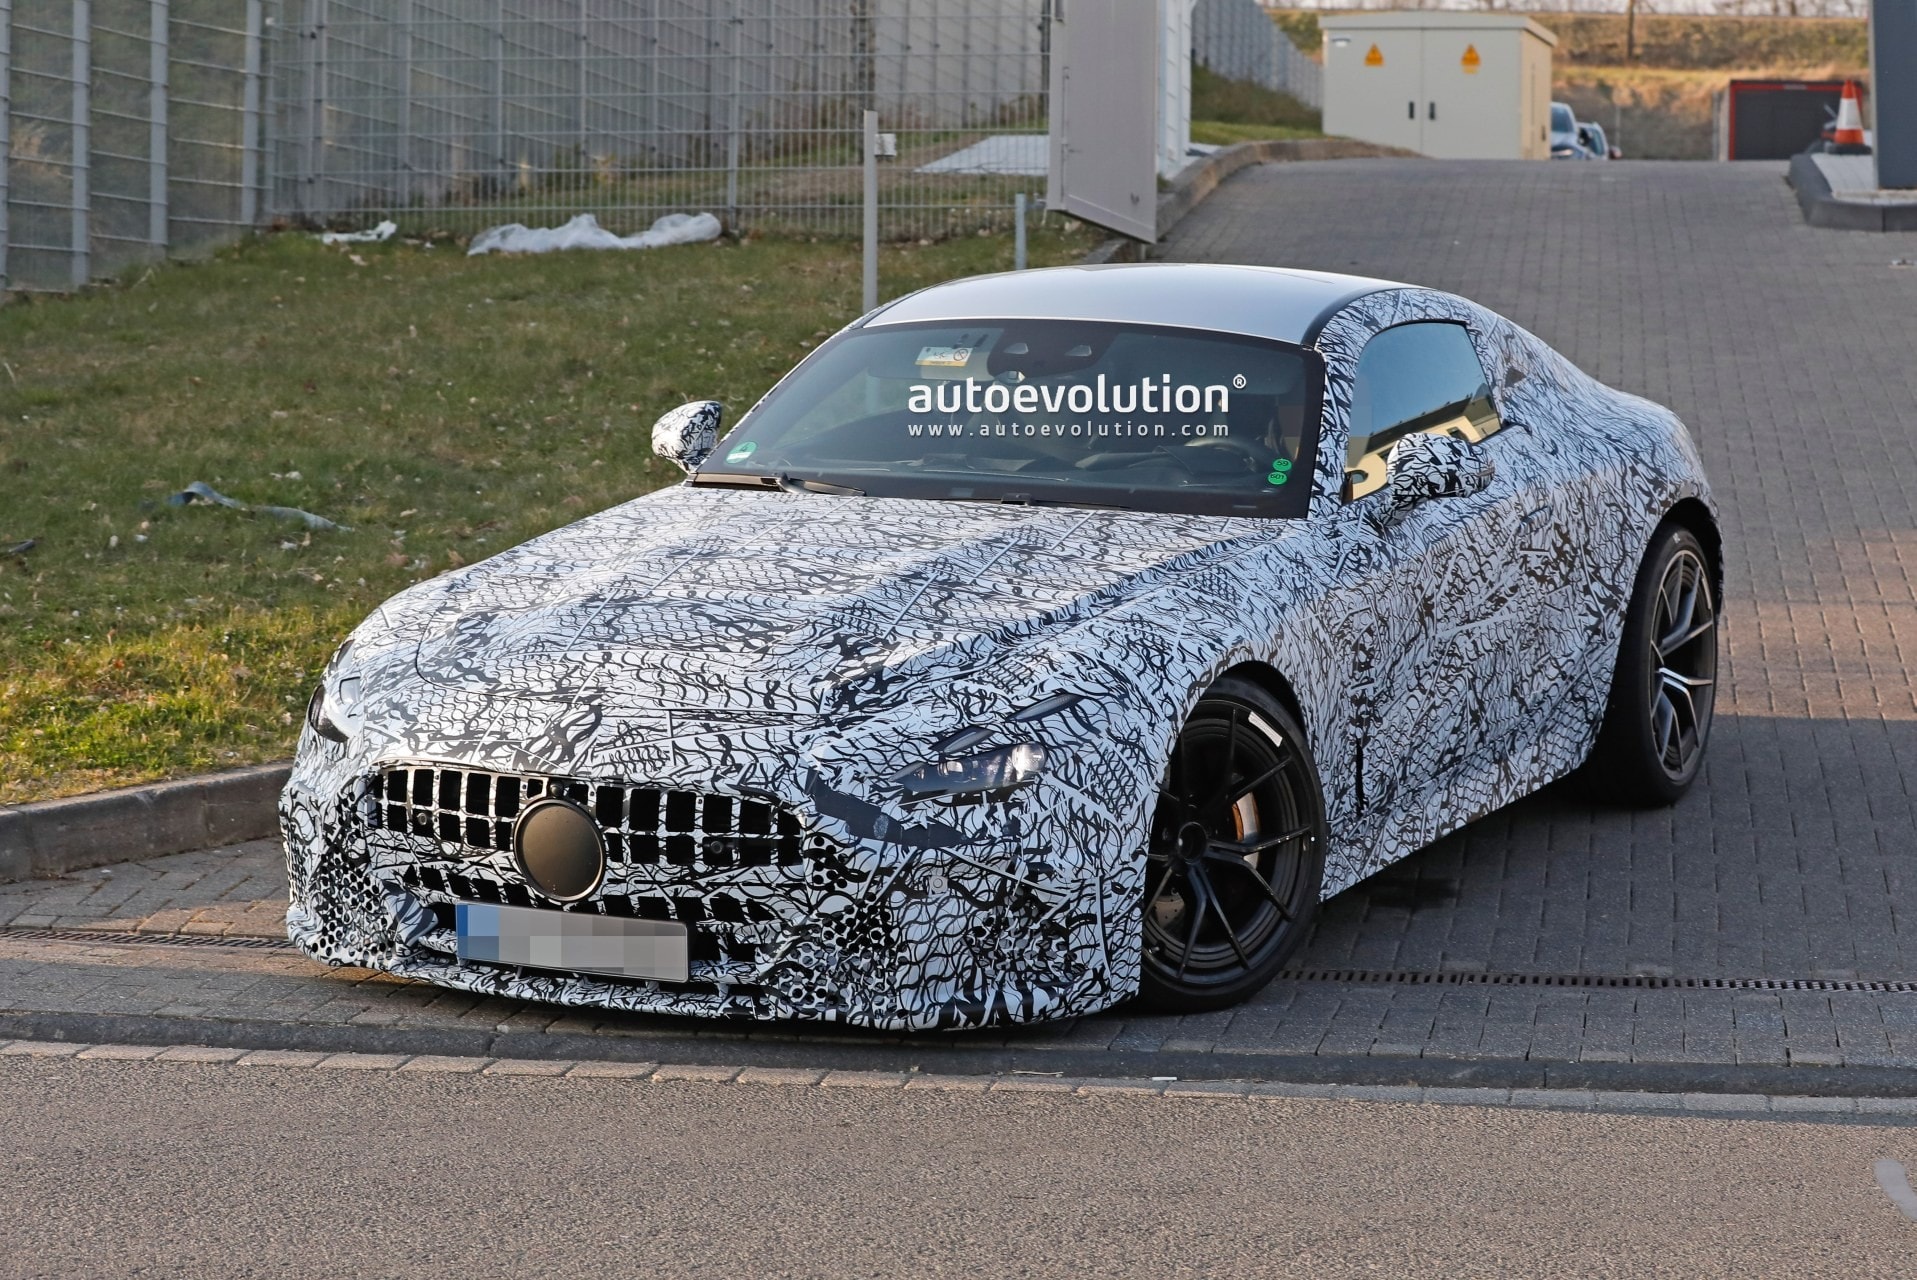 2023 Mercedes-AMG GT Prototype Spied Near the Nurburgring in Full